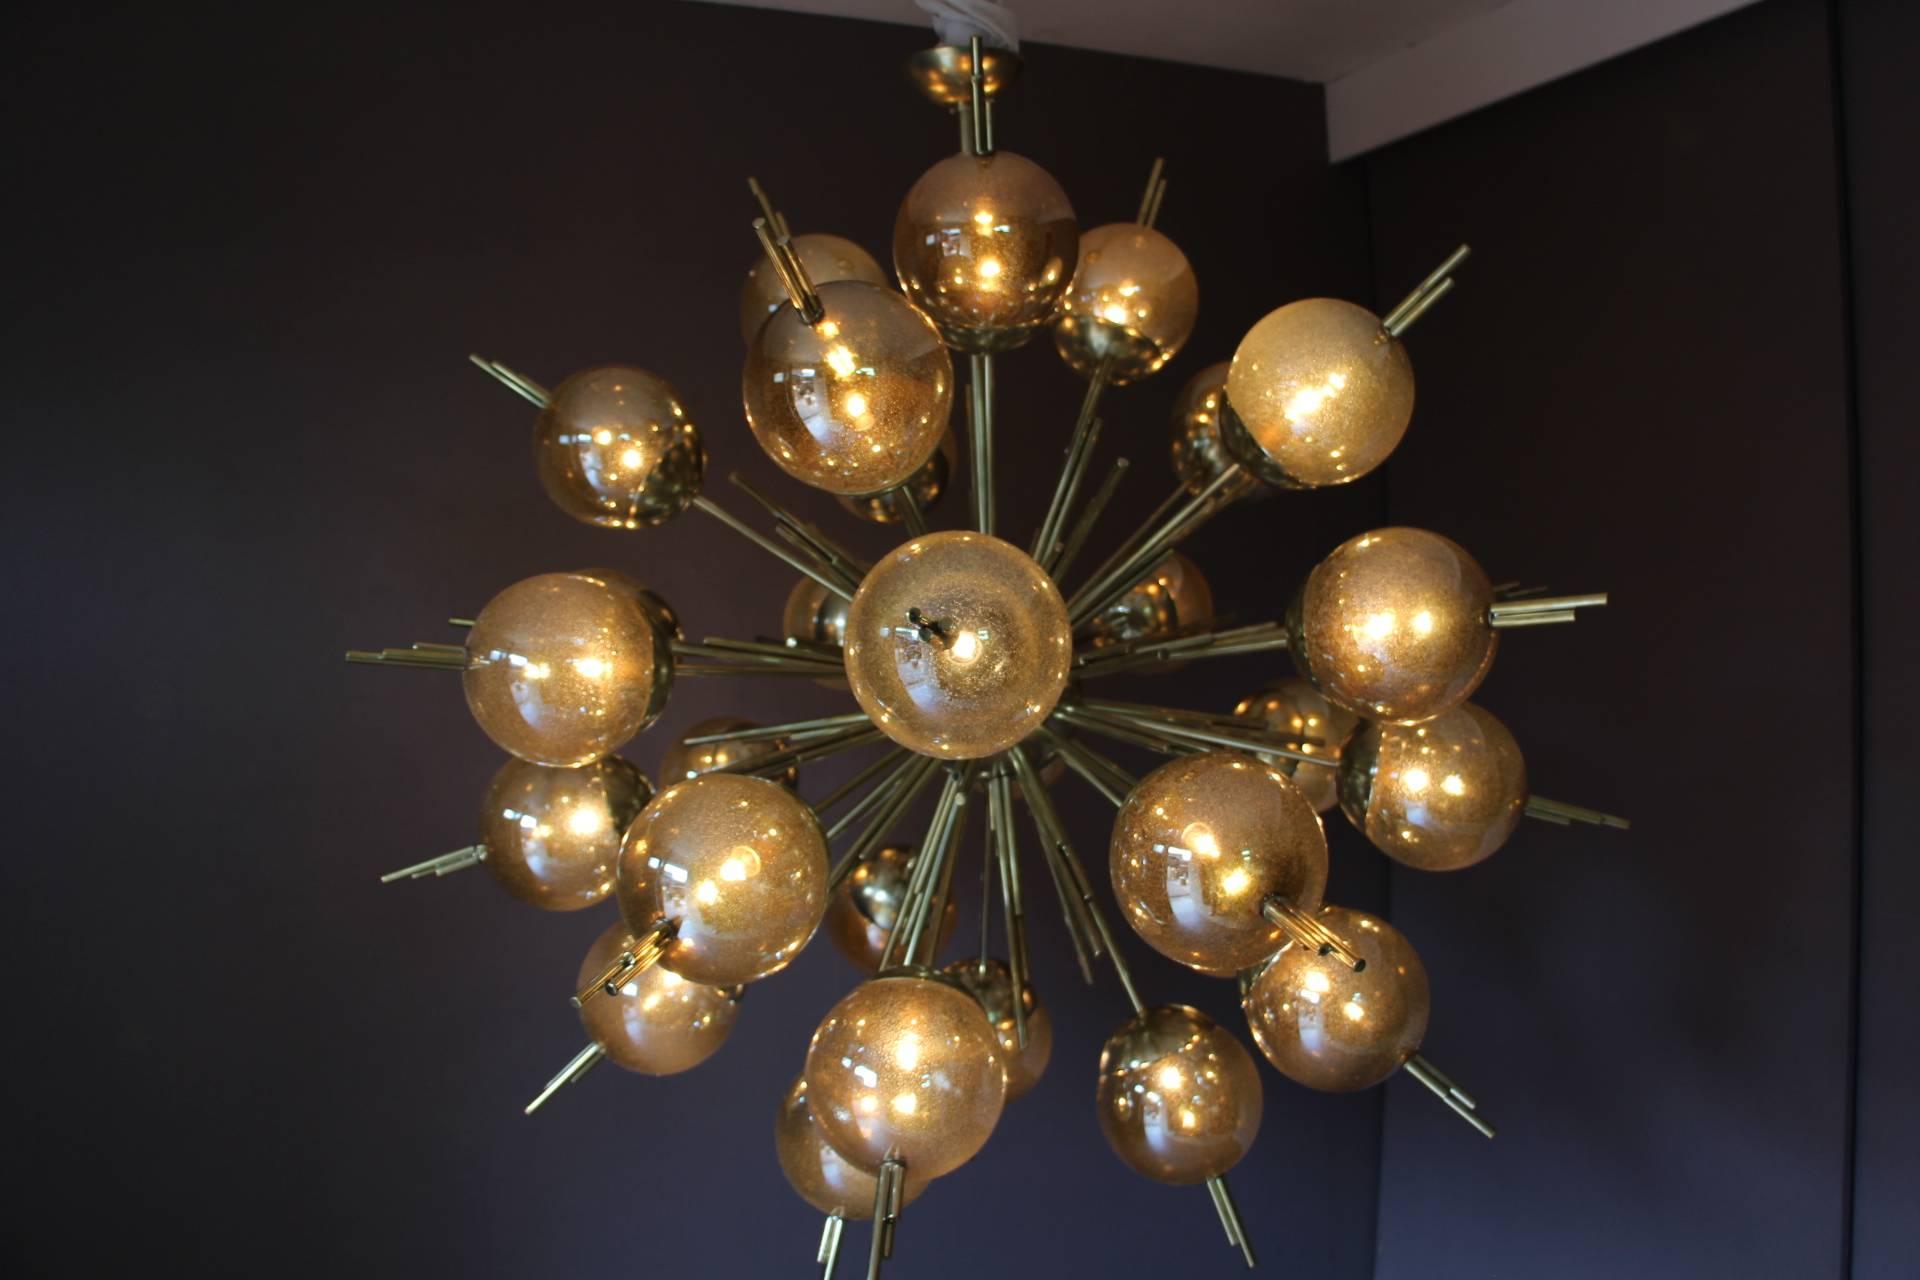 This very chic chandelier features 30 golden glitters glass globes mounted on brass rods.
When light is on glass globes show golden glitter inclusions and when it is off, they become mercury color.
It is very elegant and impressive.
Warm and